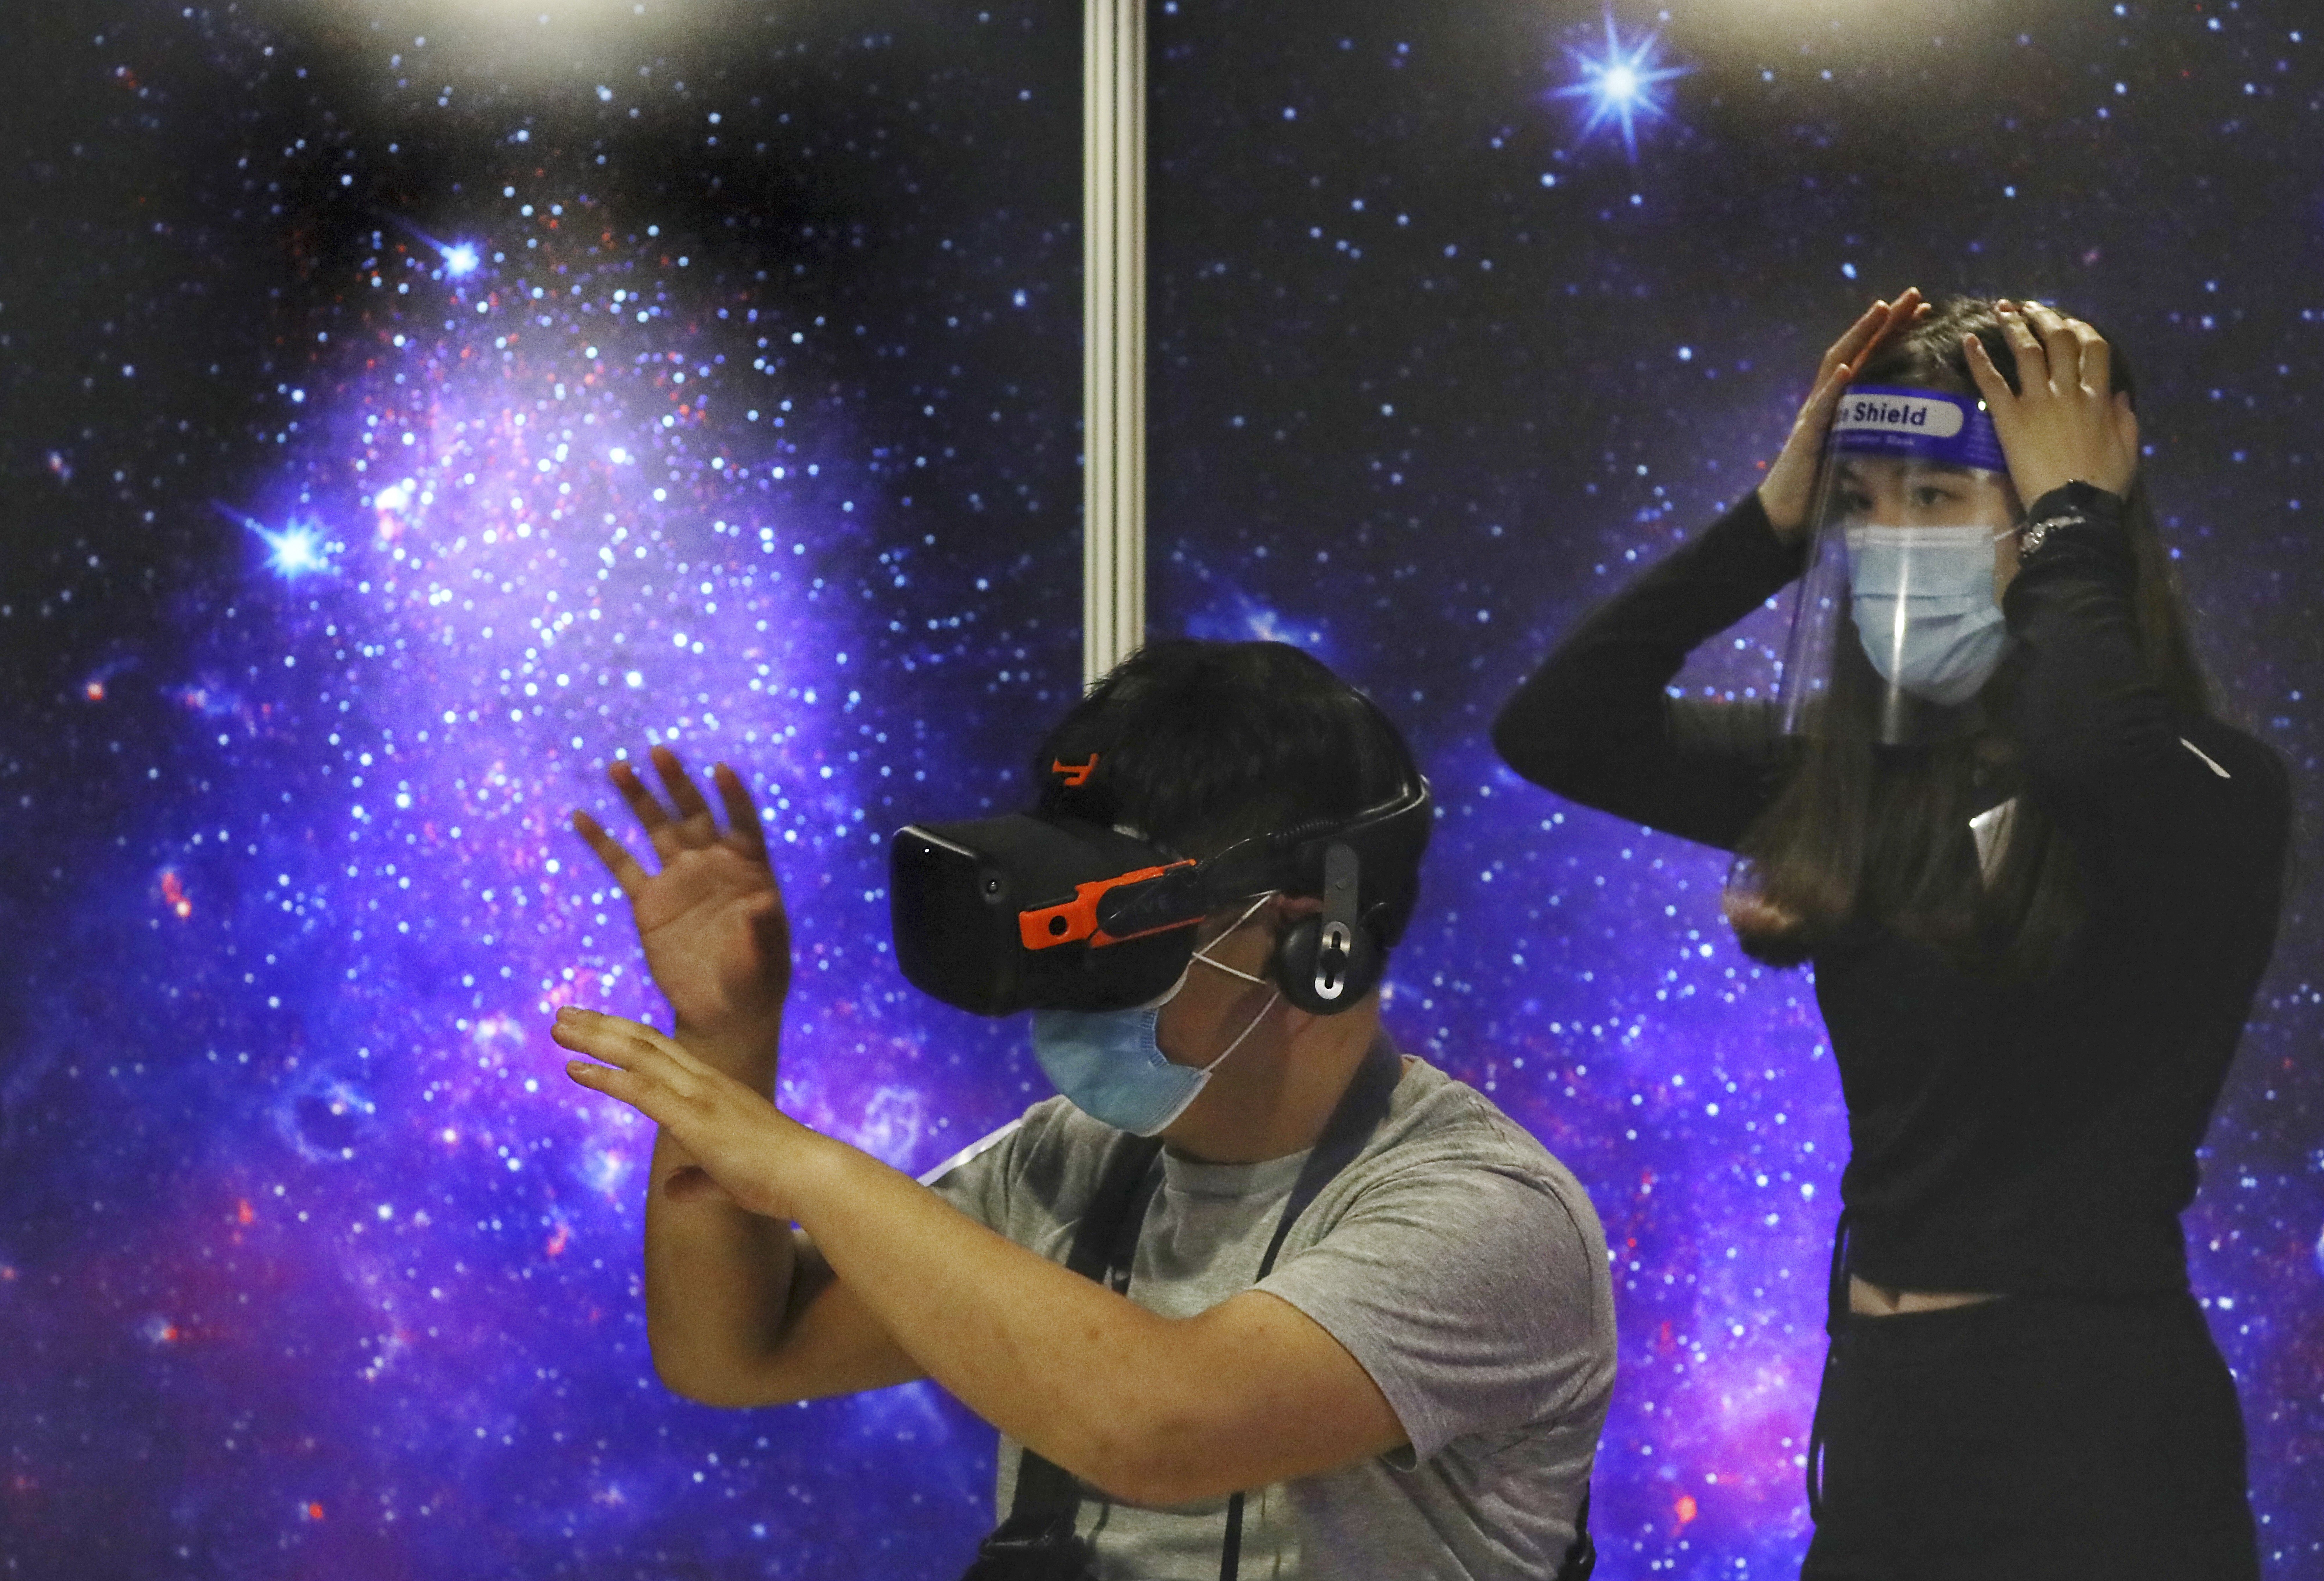 Visitors try out a virtual reality exhibition, “Univers/e”, at the Hong Kong Space Museum in Tsim Sha Tsui. Photo: Nora Tam